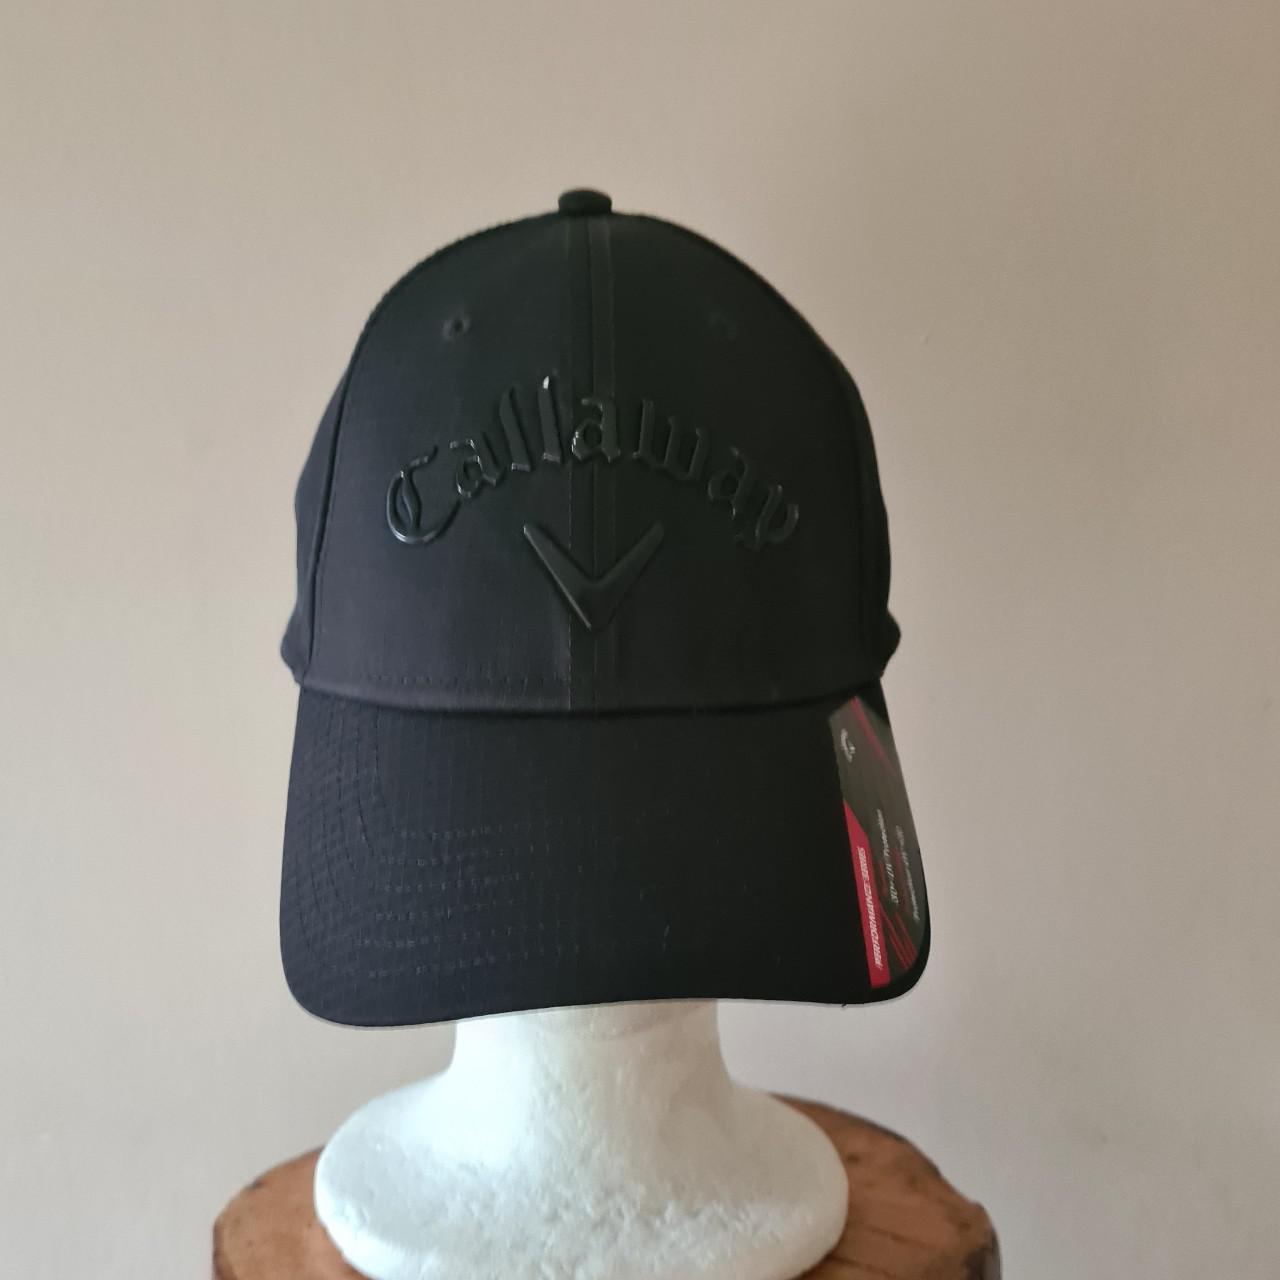 Shore Nuf Charters fishing hat. Cool embroidered - Depop